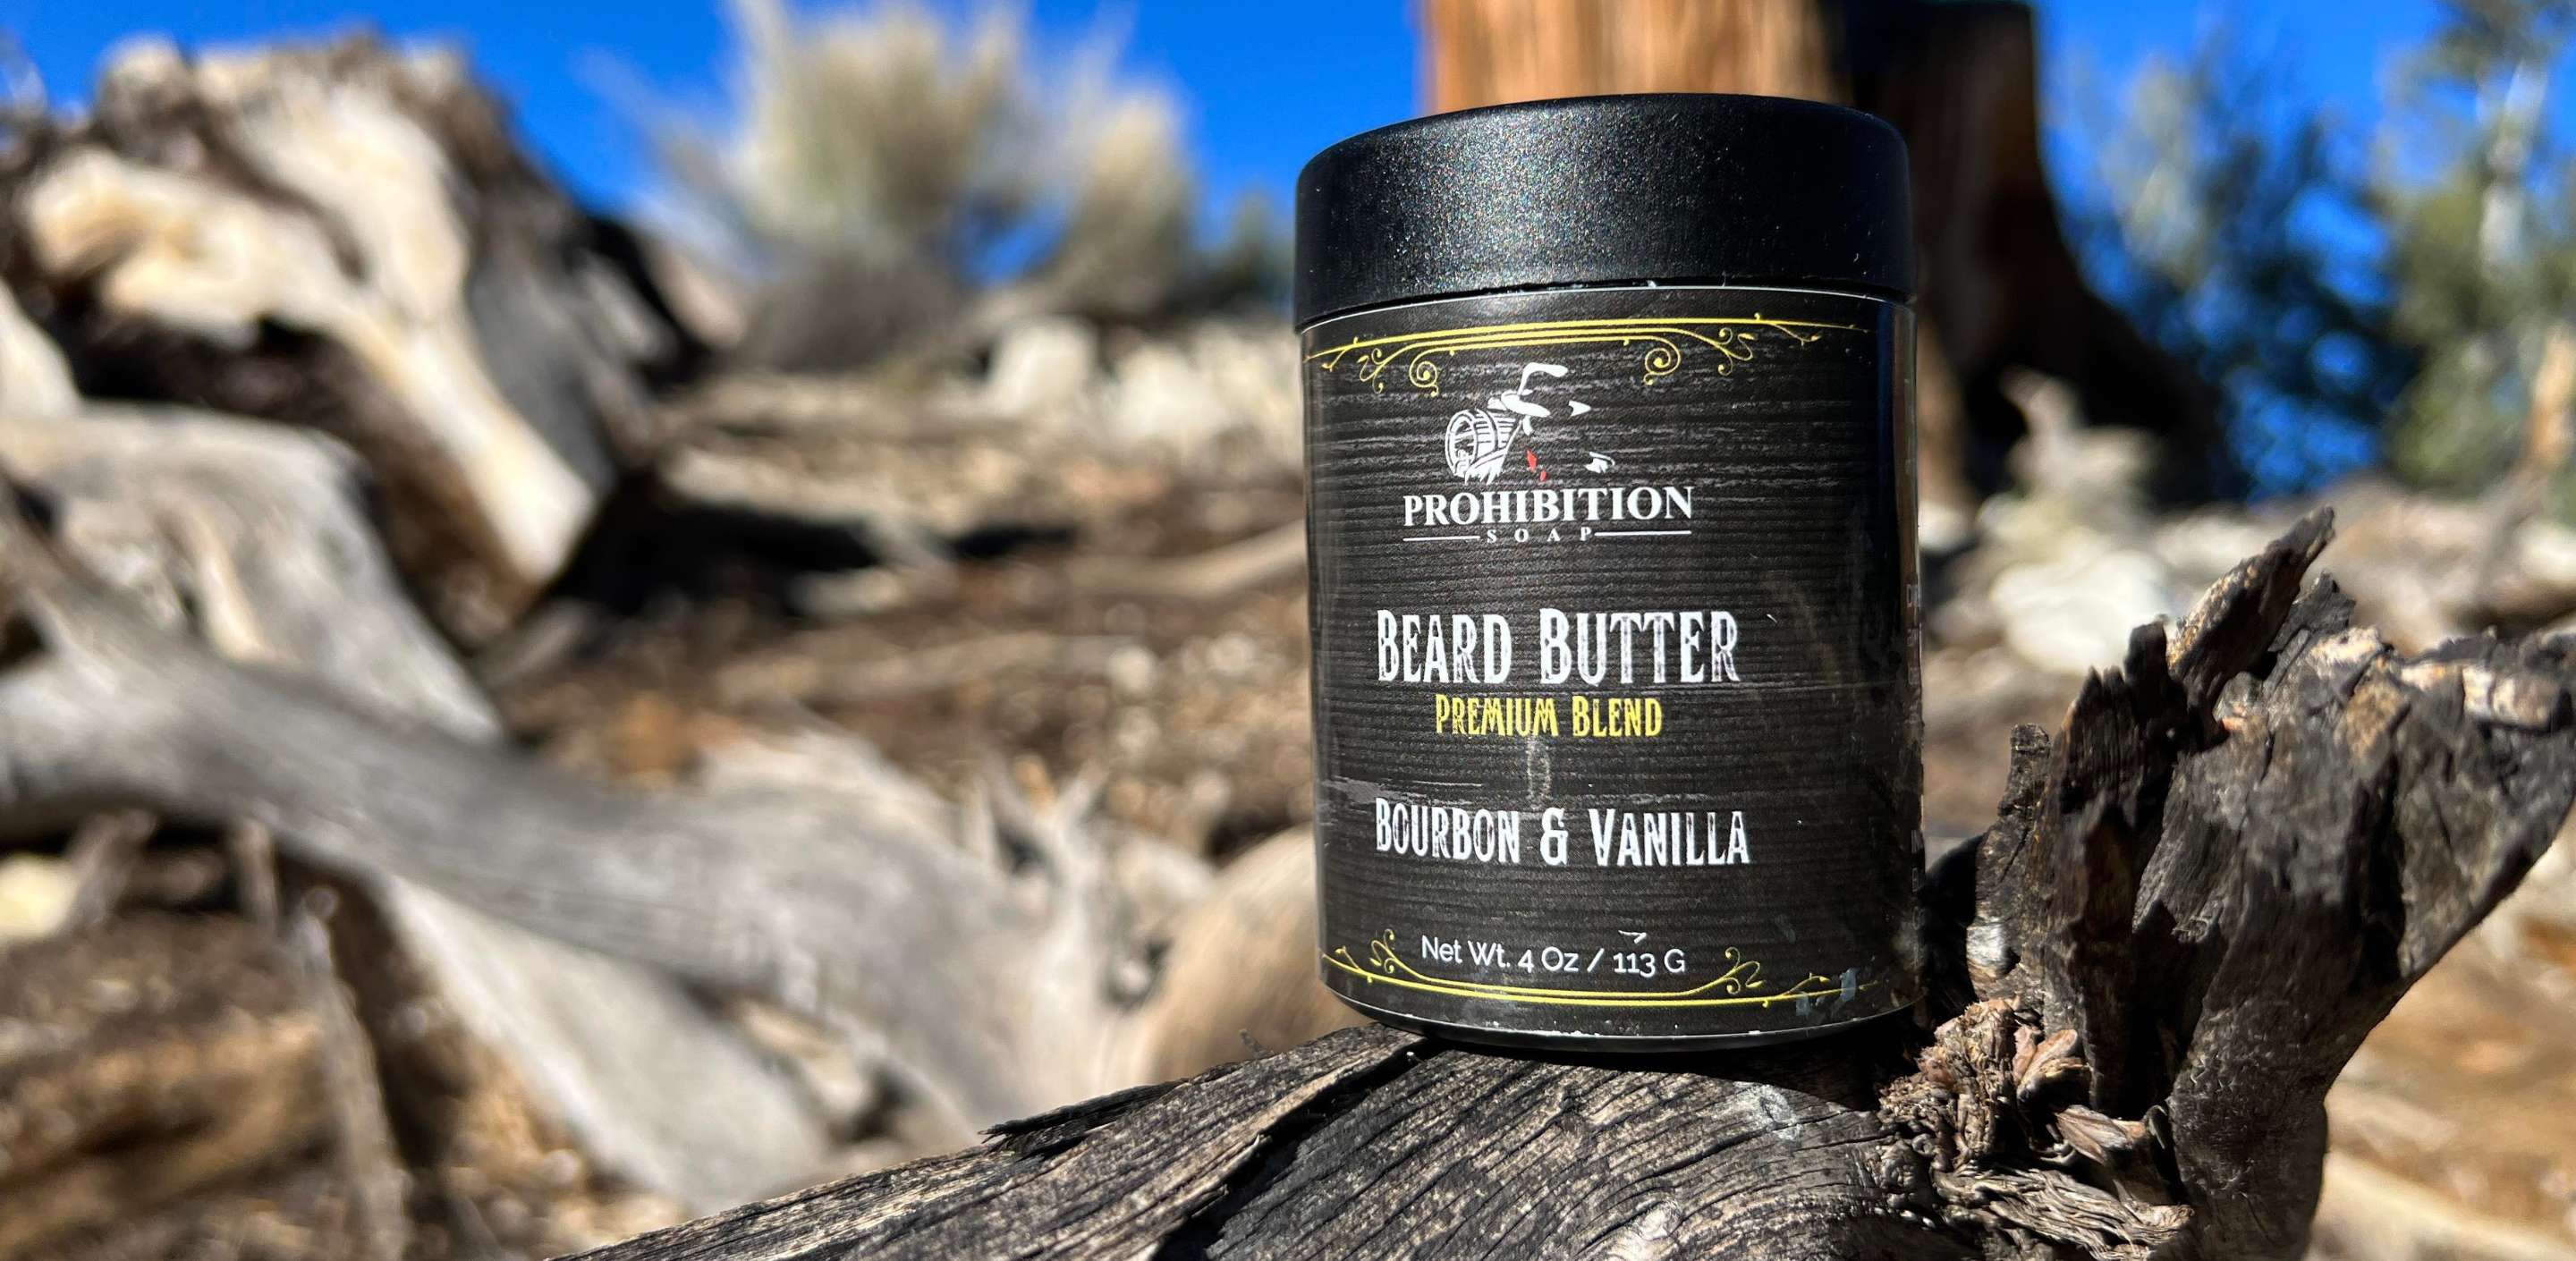 Beard Butter: The Ultimate Beard Care Essential You Never Knew You Needed